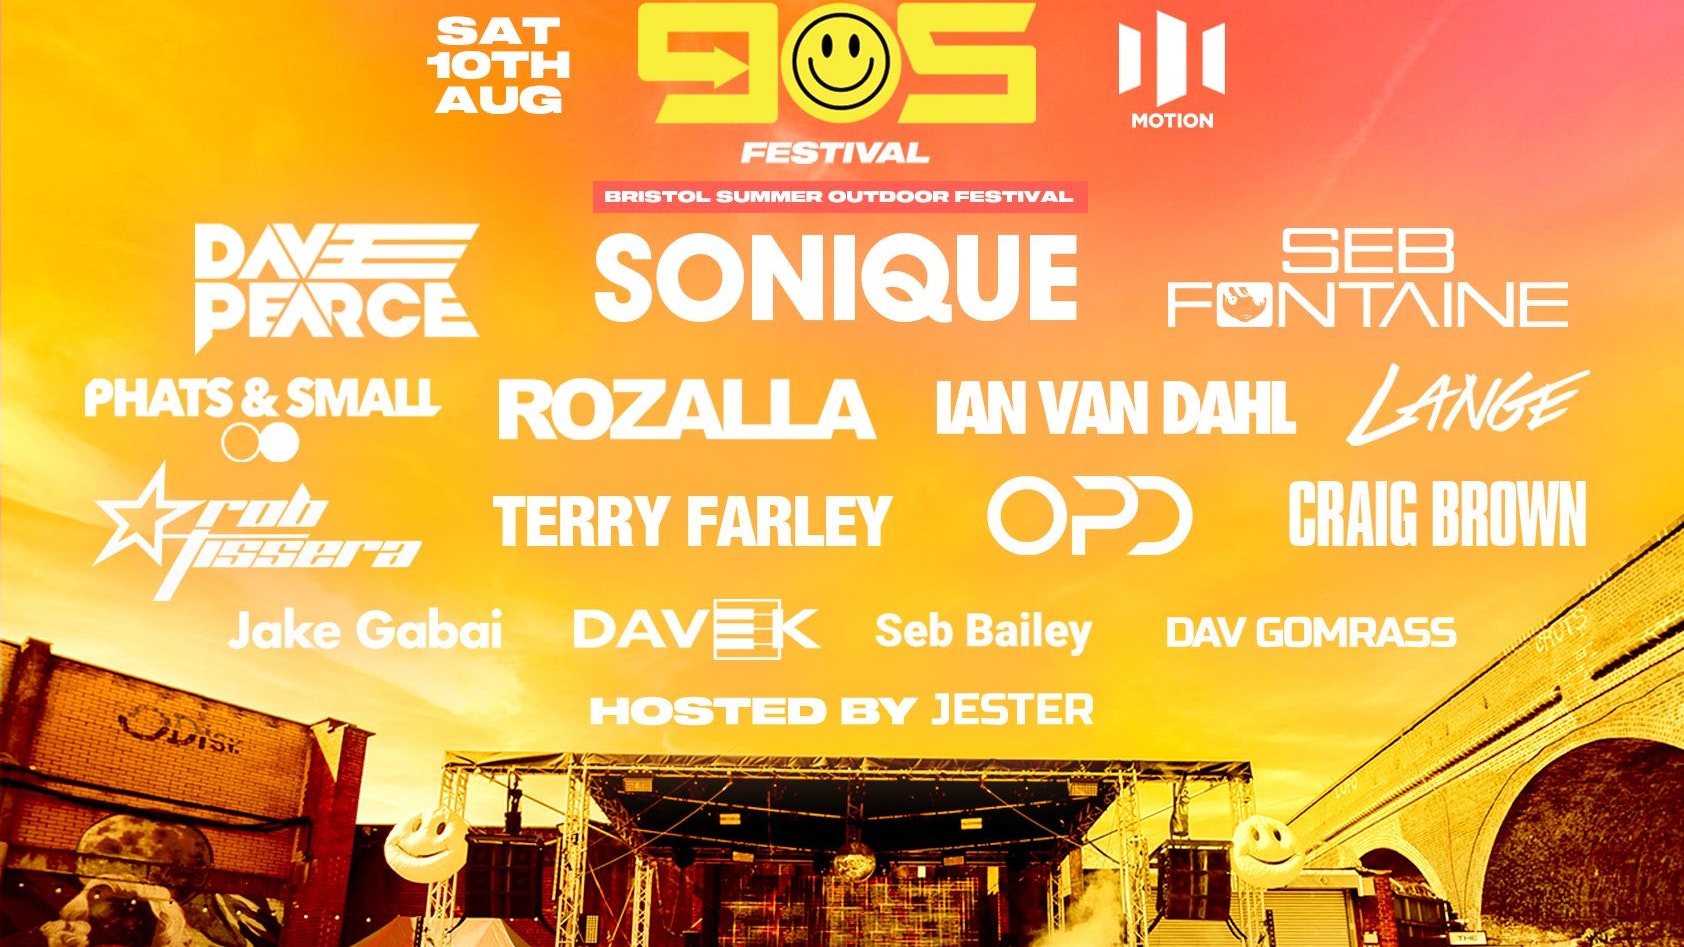 Back To The 90s – Summer Outdoor Festival – Motion [GENERAL ADMISSION TICKETS ON SALE 9AM THURSDAY!]